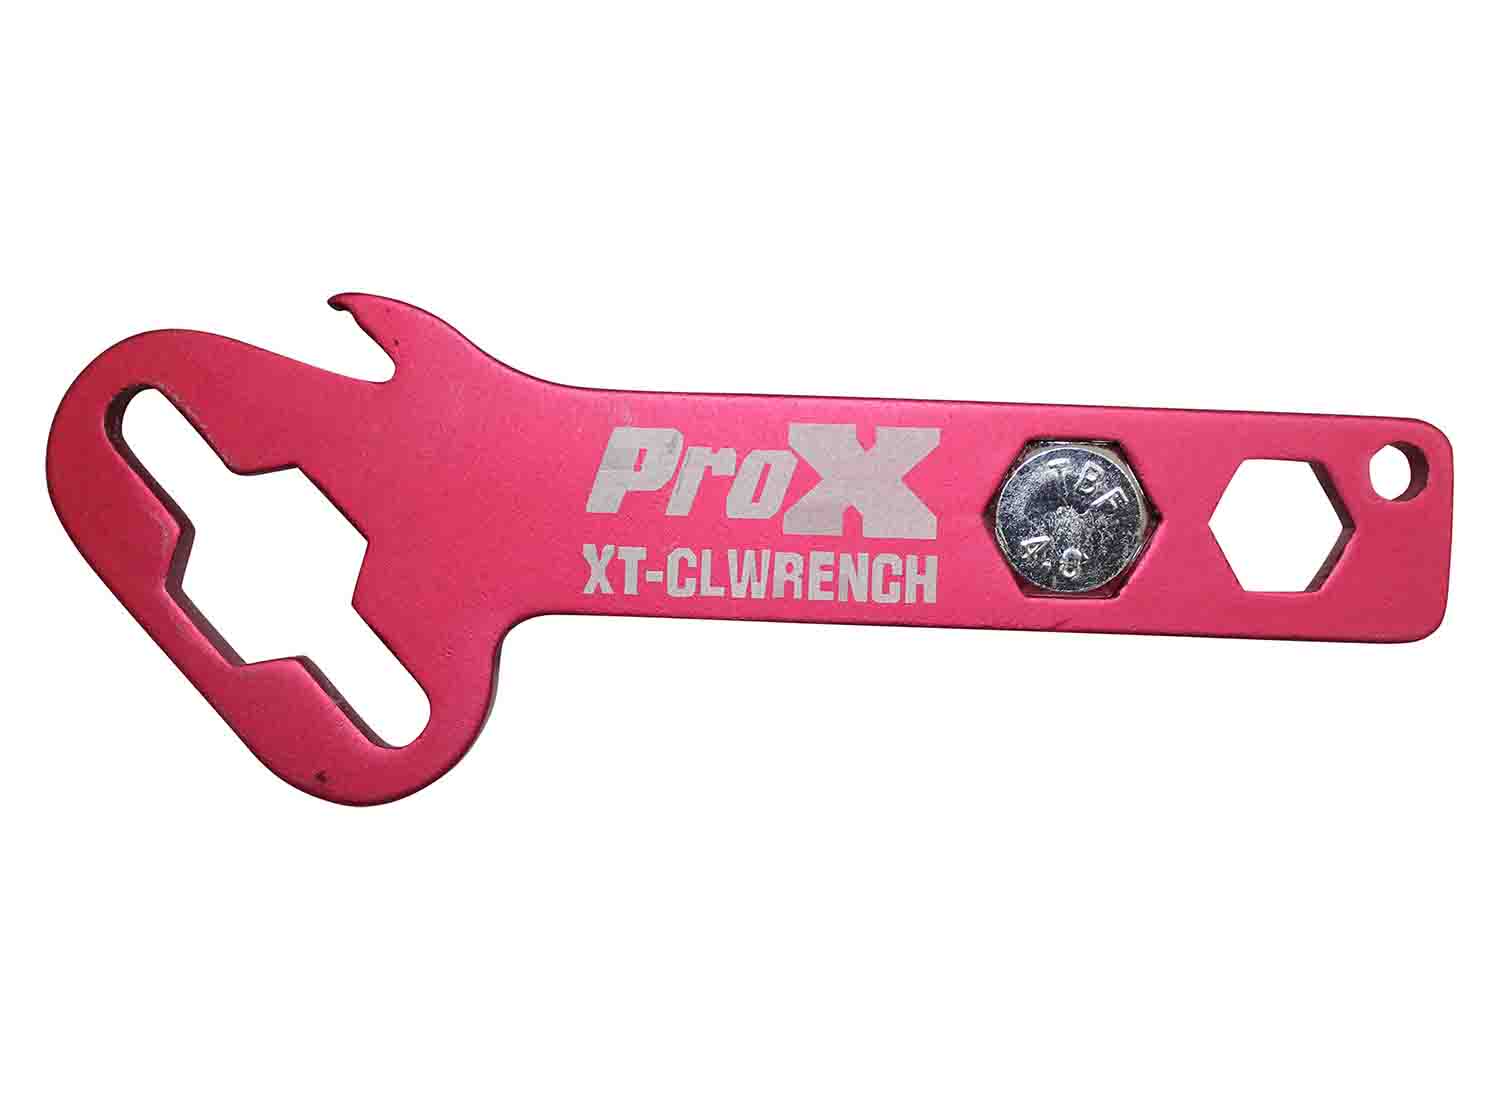 ProX XT-CLWRENCH Multi-Function Monkey Wrench - Red - Hollywood DJ